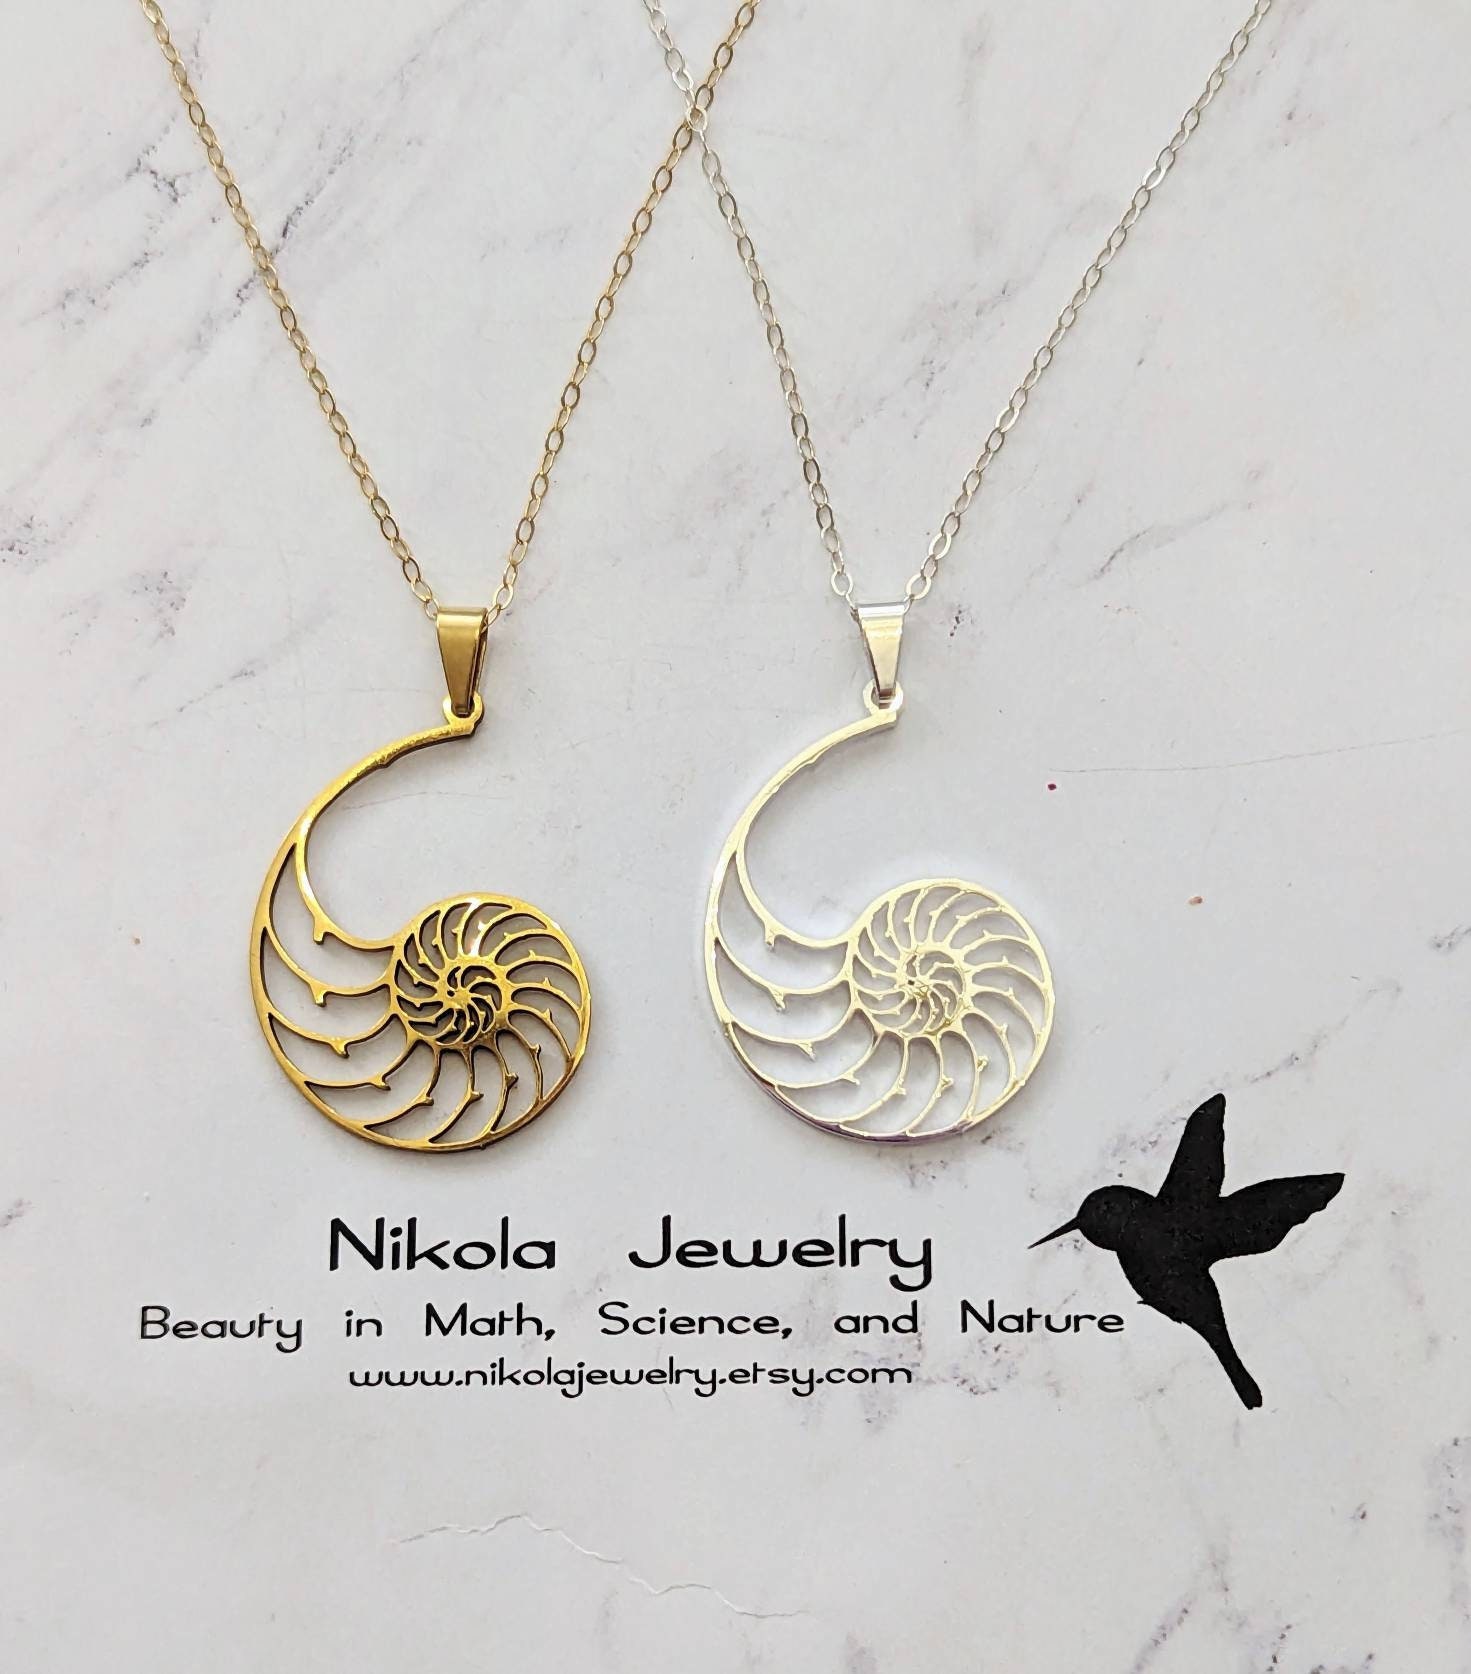 Nautilus Necklace in Gold or Silver, Fossil Necklace, Biology Gift, Geek  Jewelry, Nautilus Pendant, Marine Biology Gift - Etsy